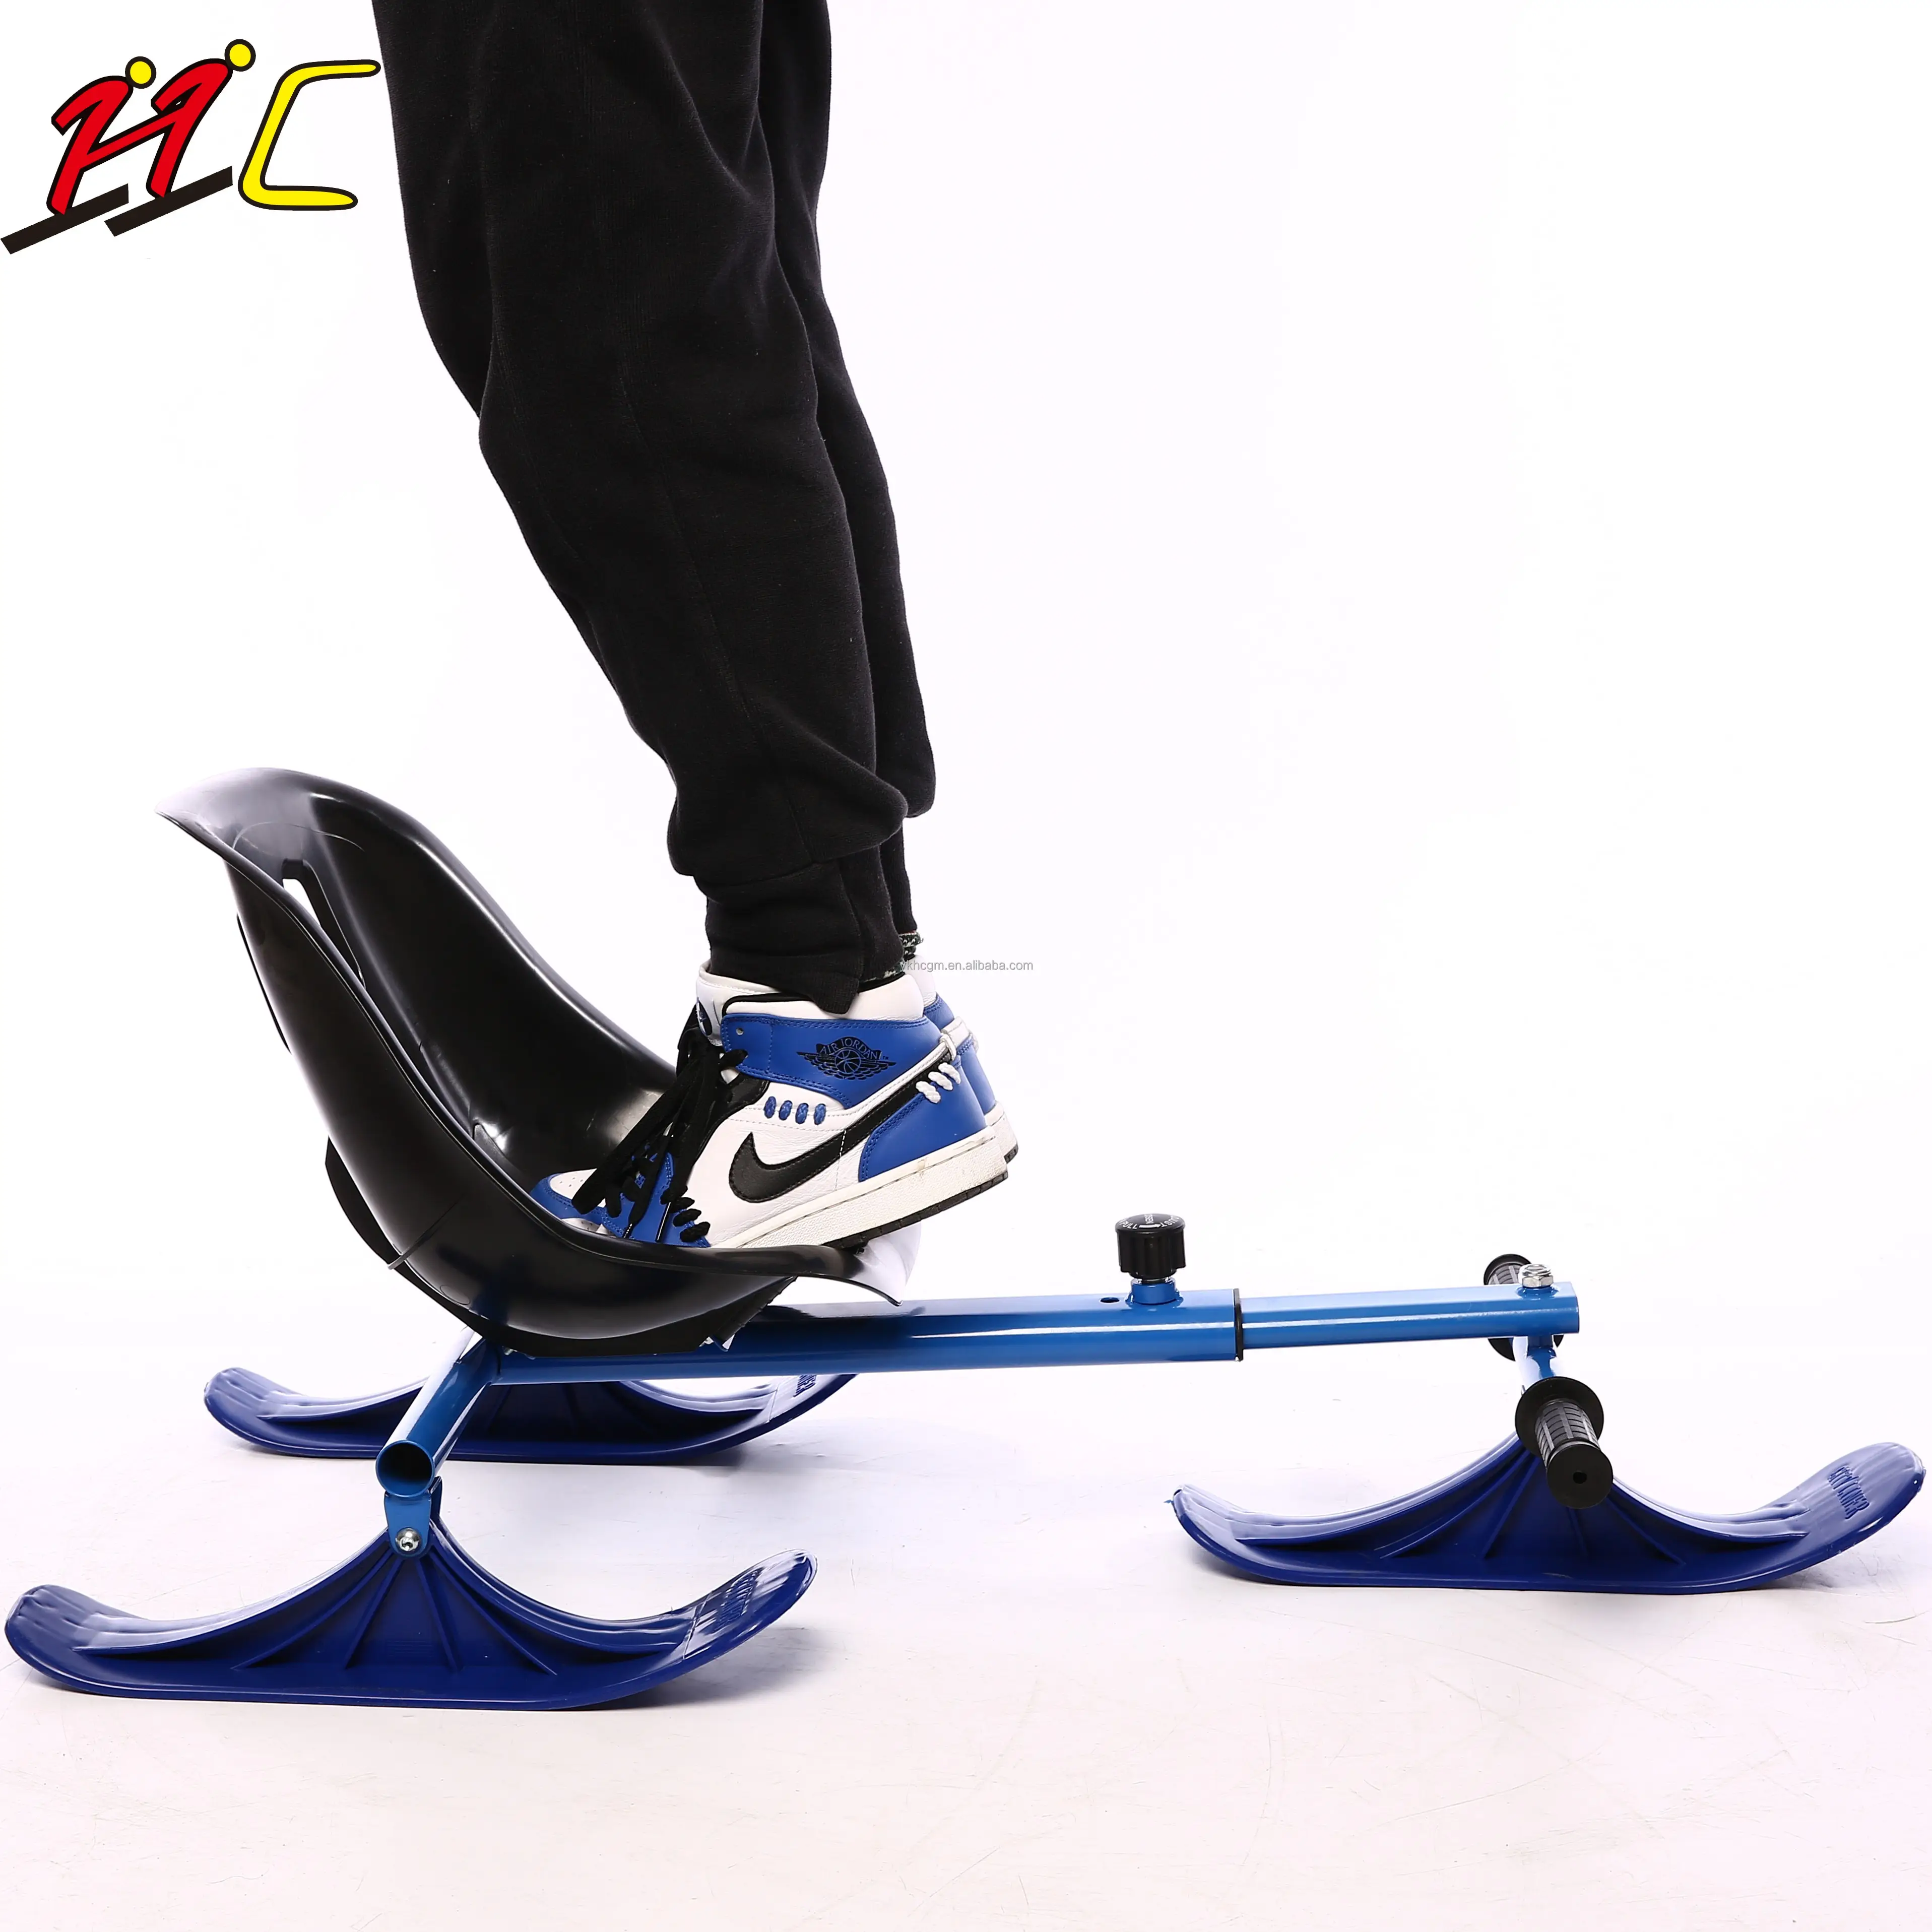 Outdoor winter sports Dual-purpose ski cart skate  replaceable skis and blades with drawstrings  easy to carry outdoors